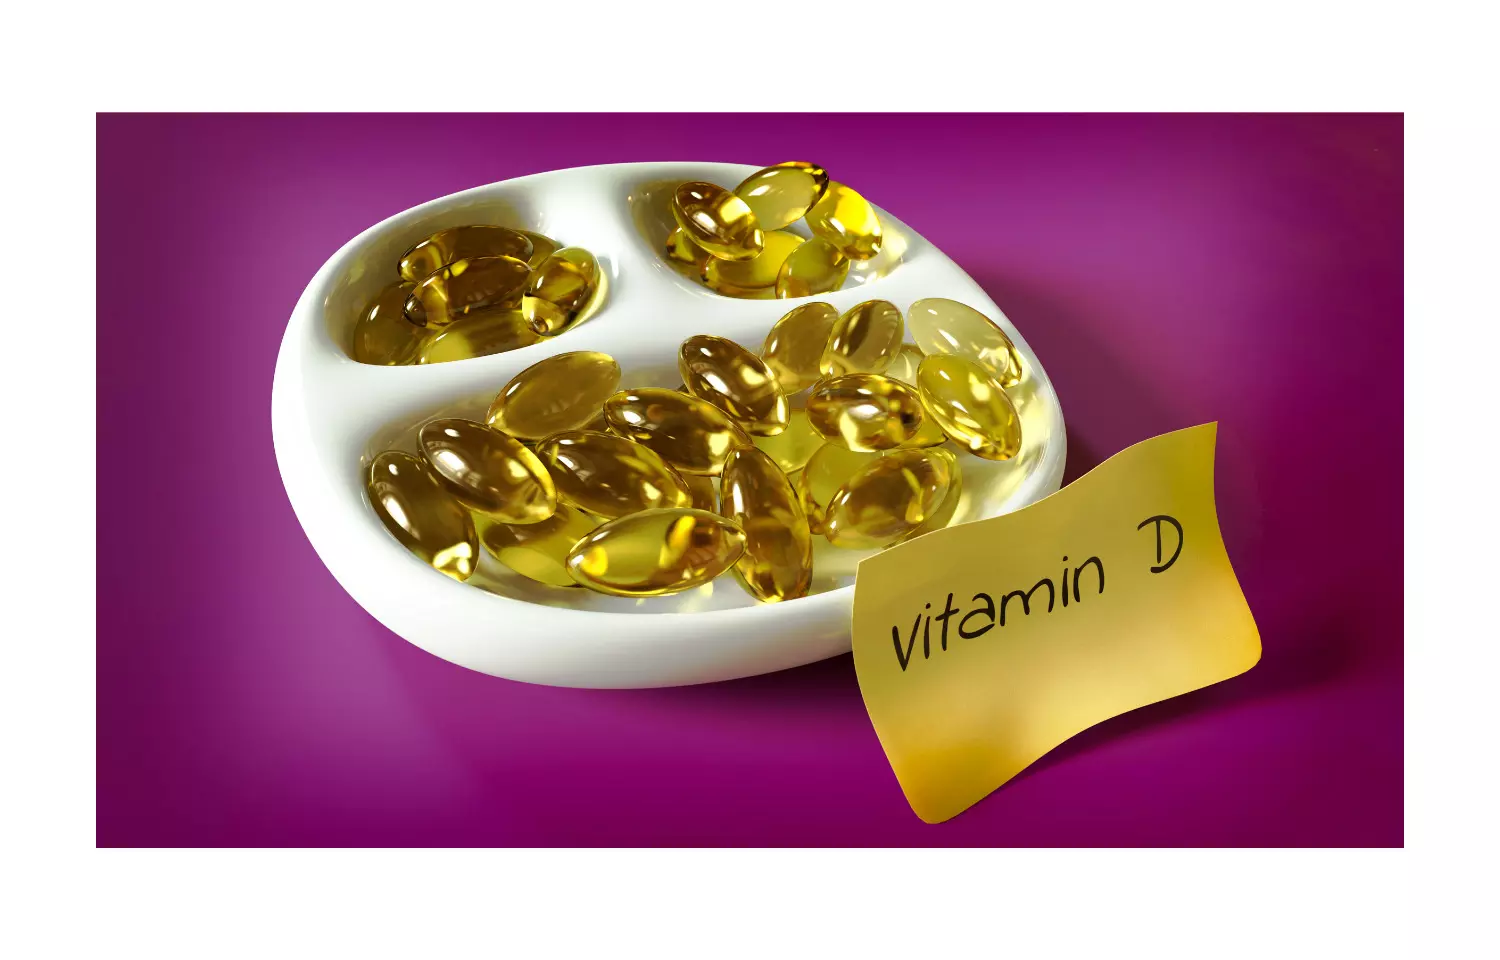 Vitamin D and Omega-3 supplementation may protect against autoimmune disorders: Study